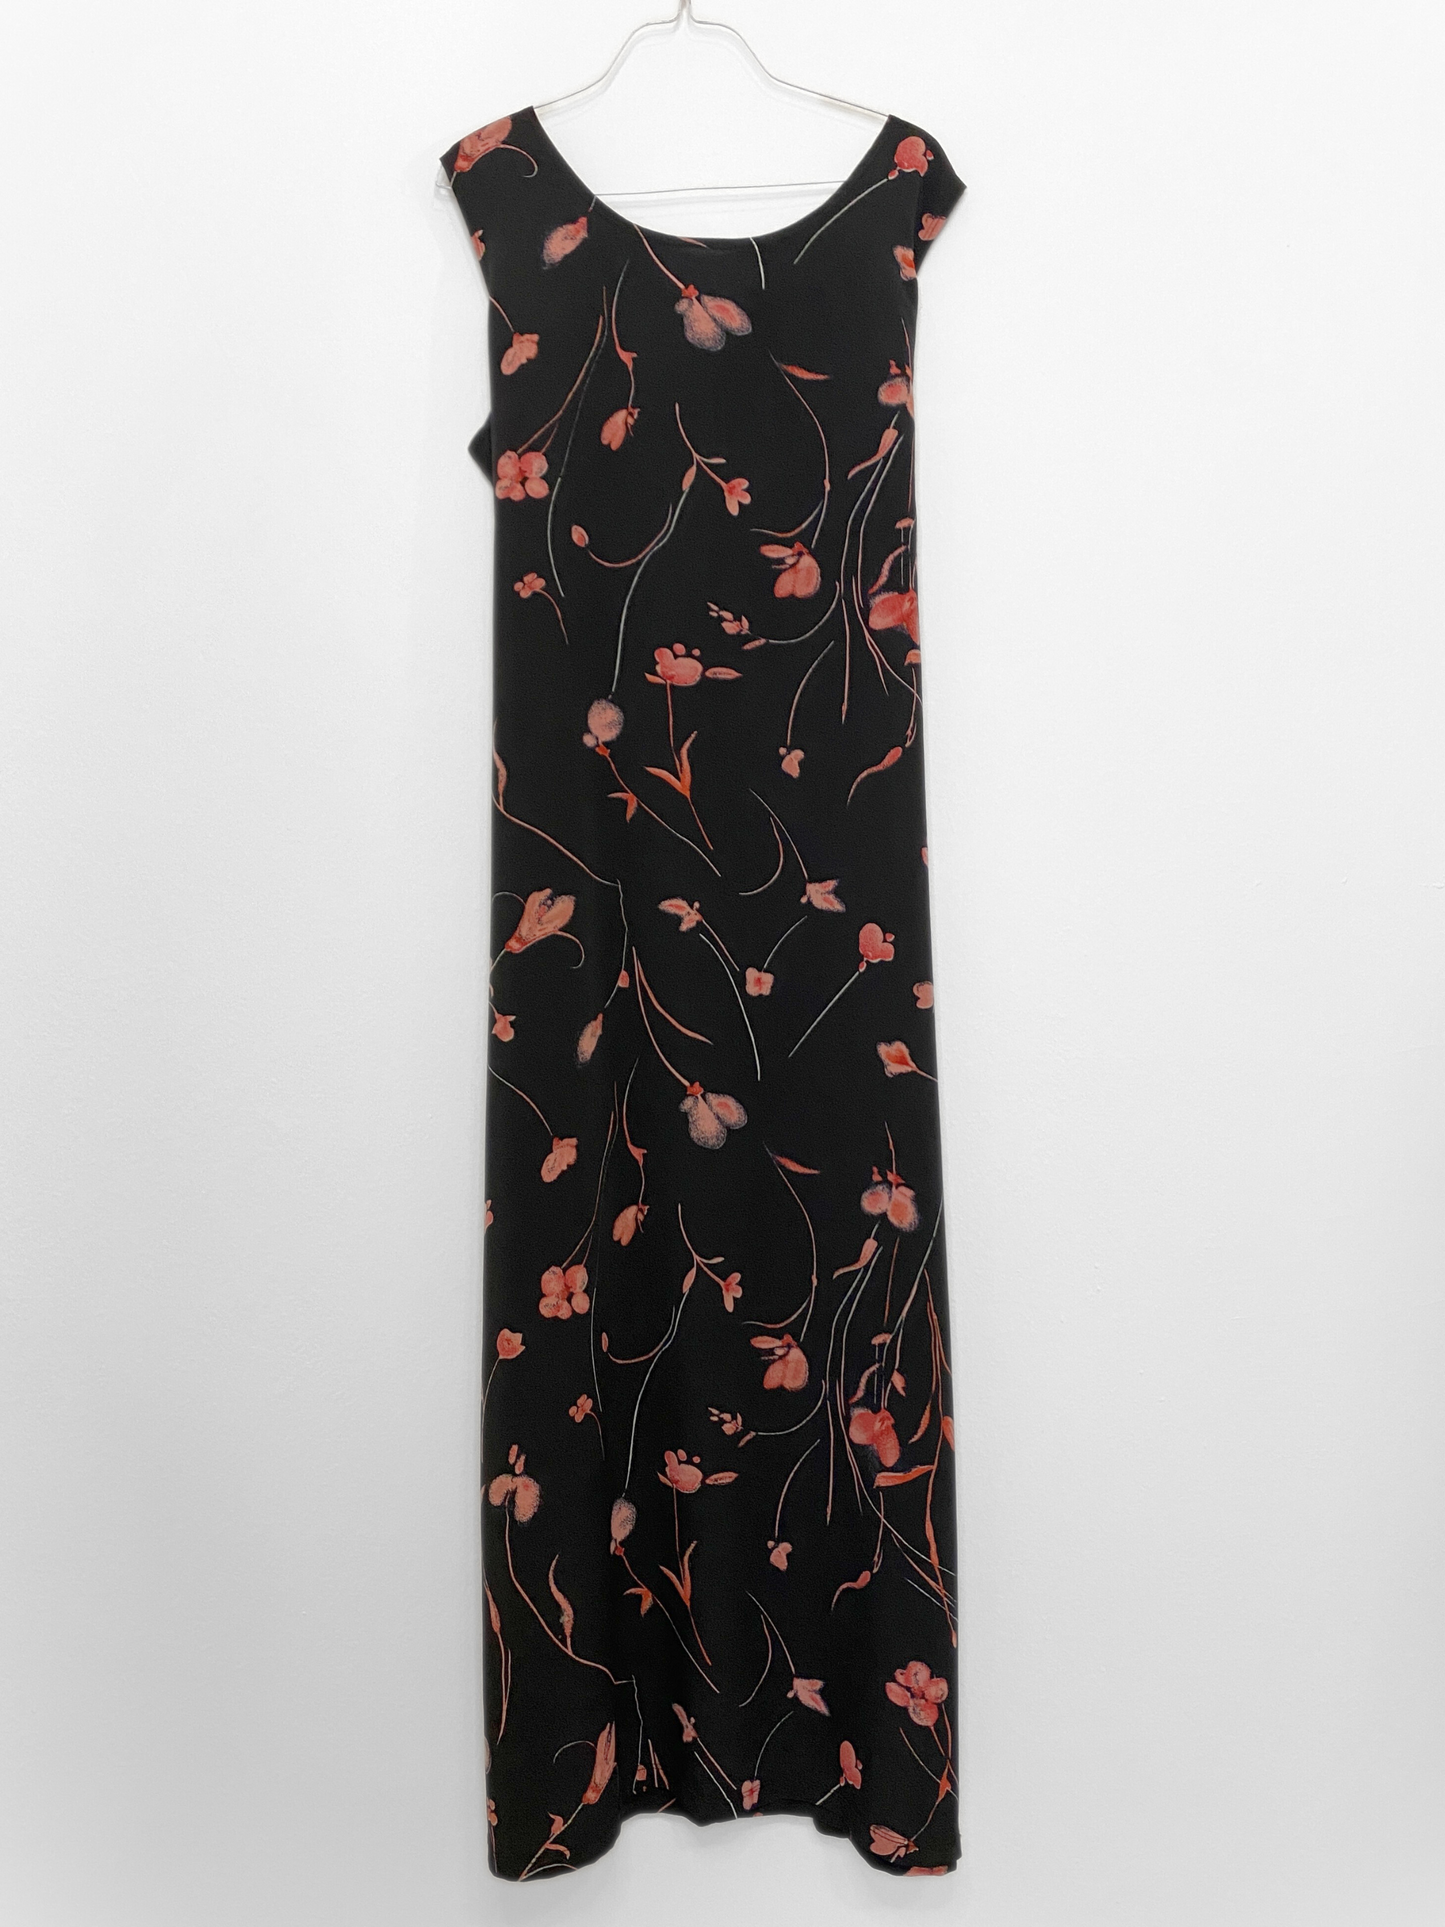 Black and Pink Floral Dress (Size 16)